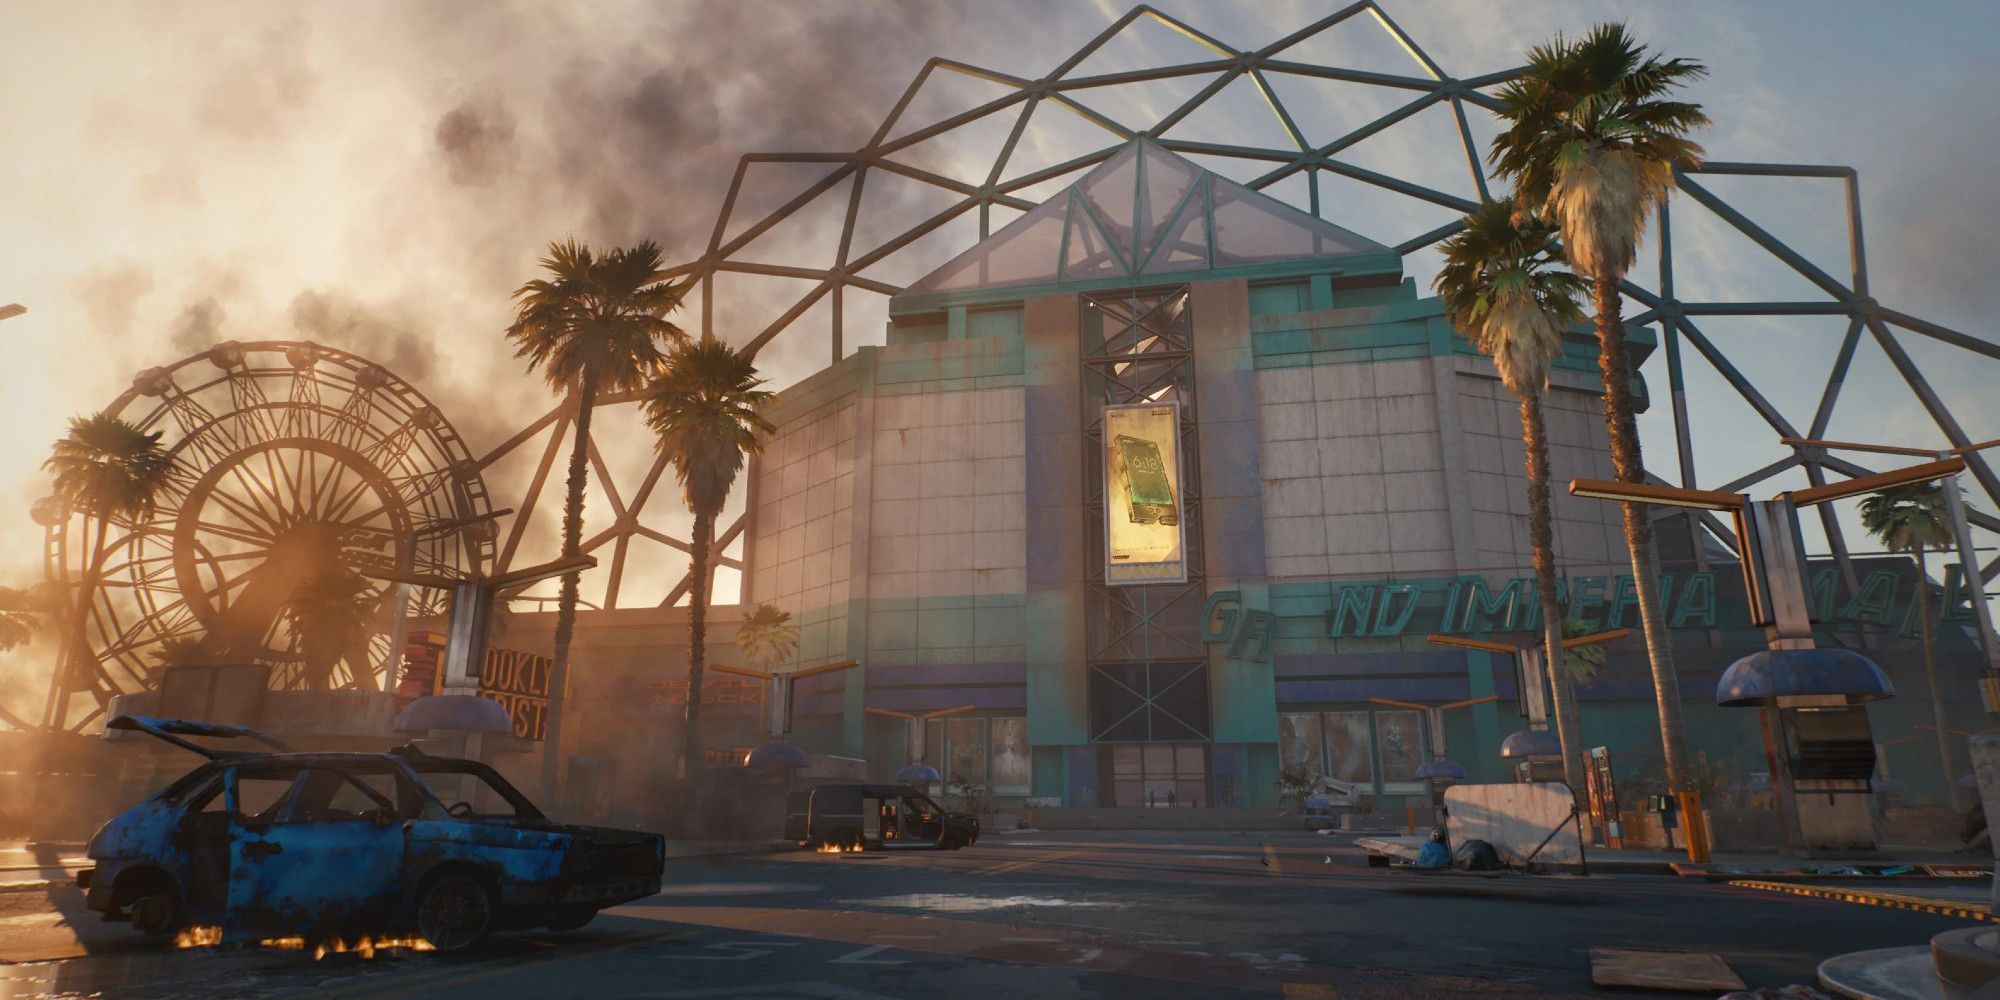 A burning car outside the Grand Imperial Mall in Cyberpunk 2077